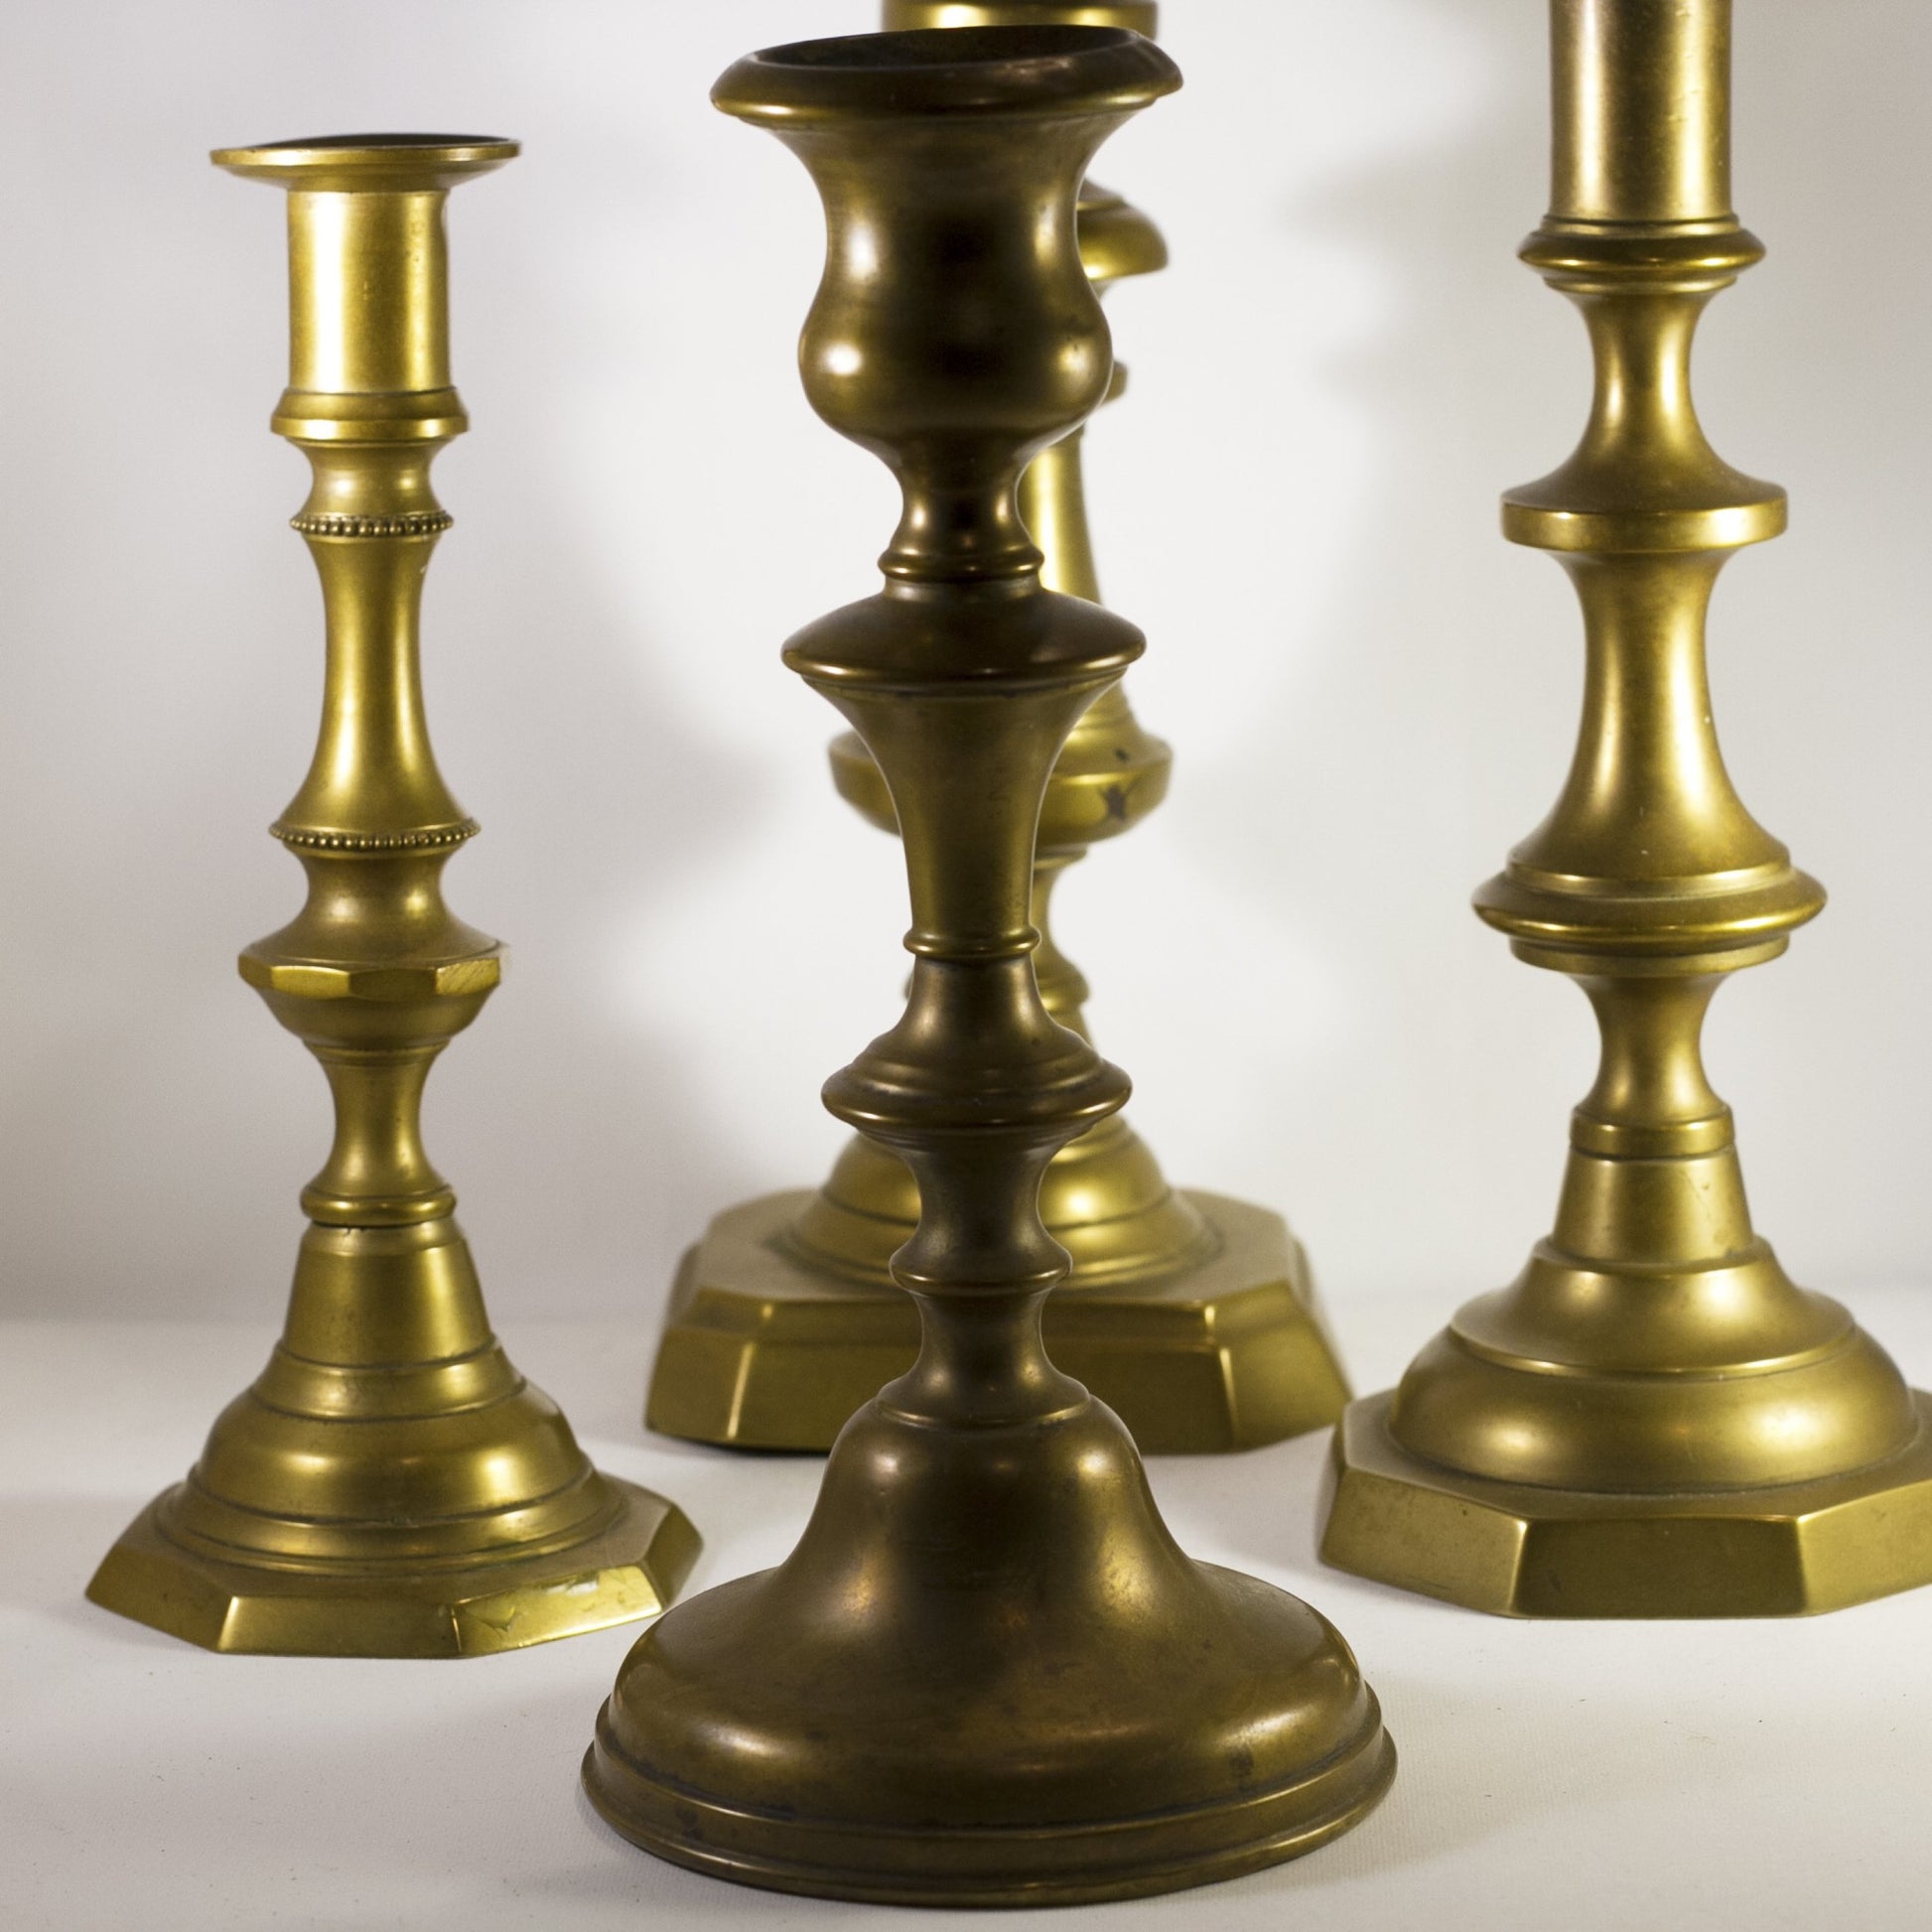 Set of Four Antique English Victorian BRASS CANDLESTICKS Late 19th Century